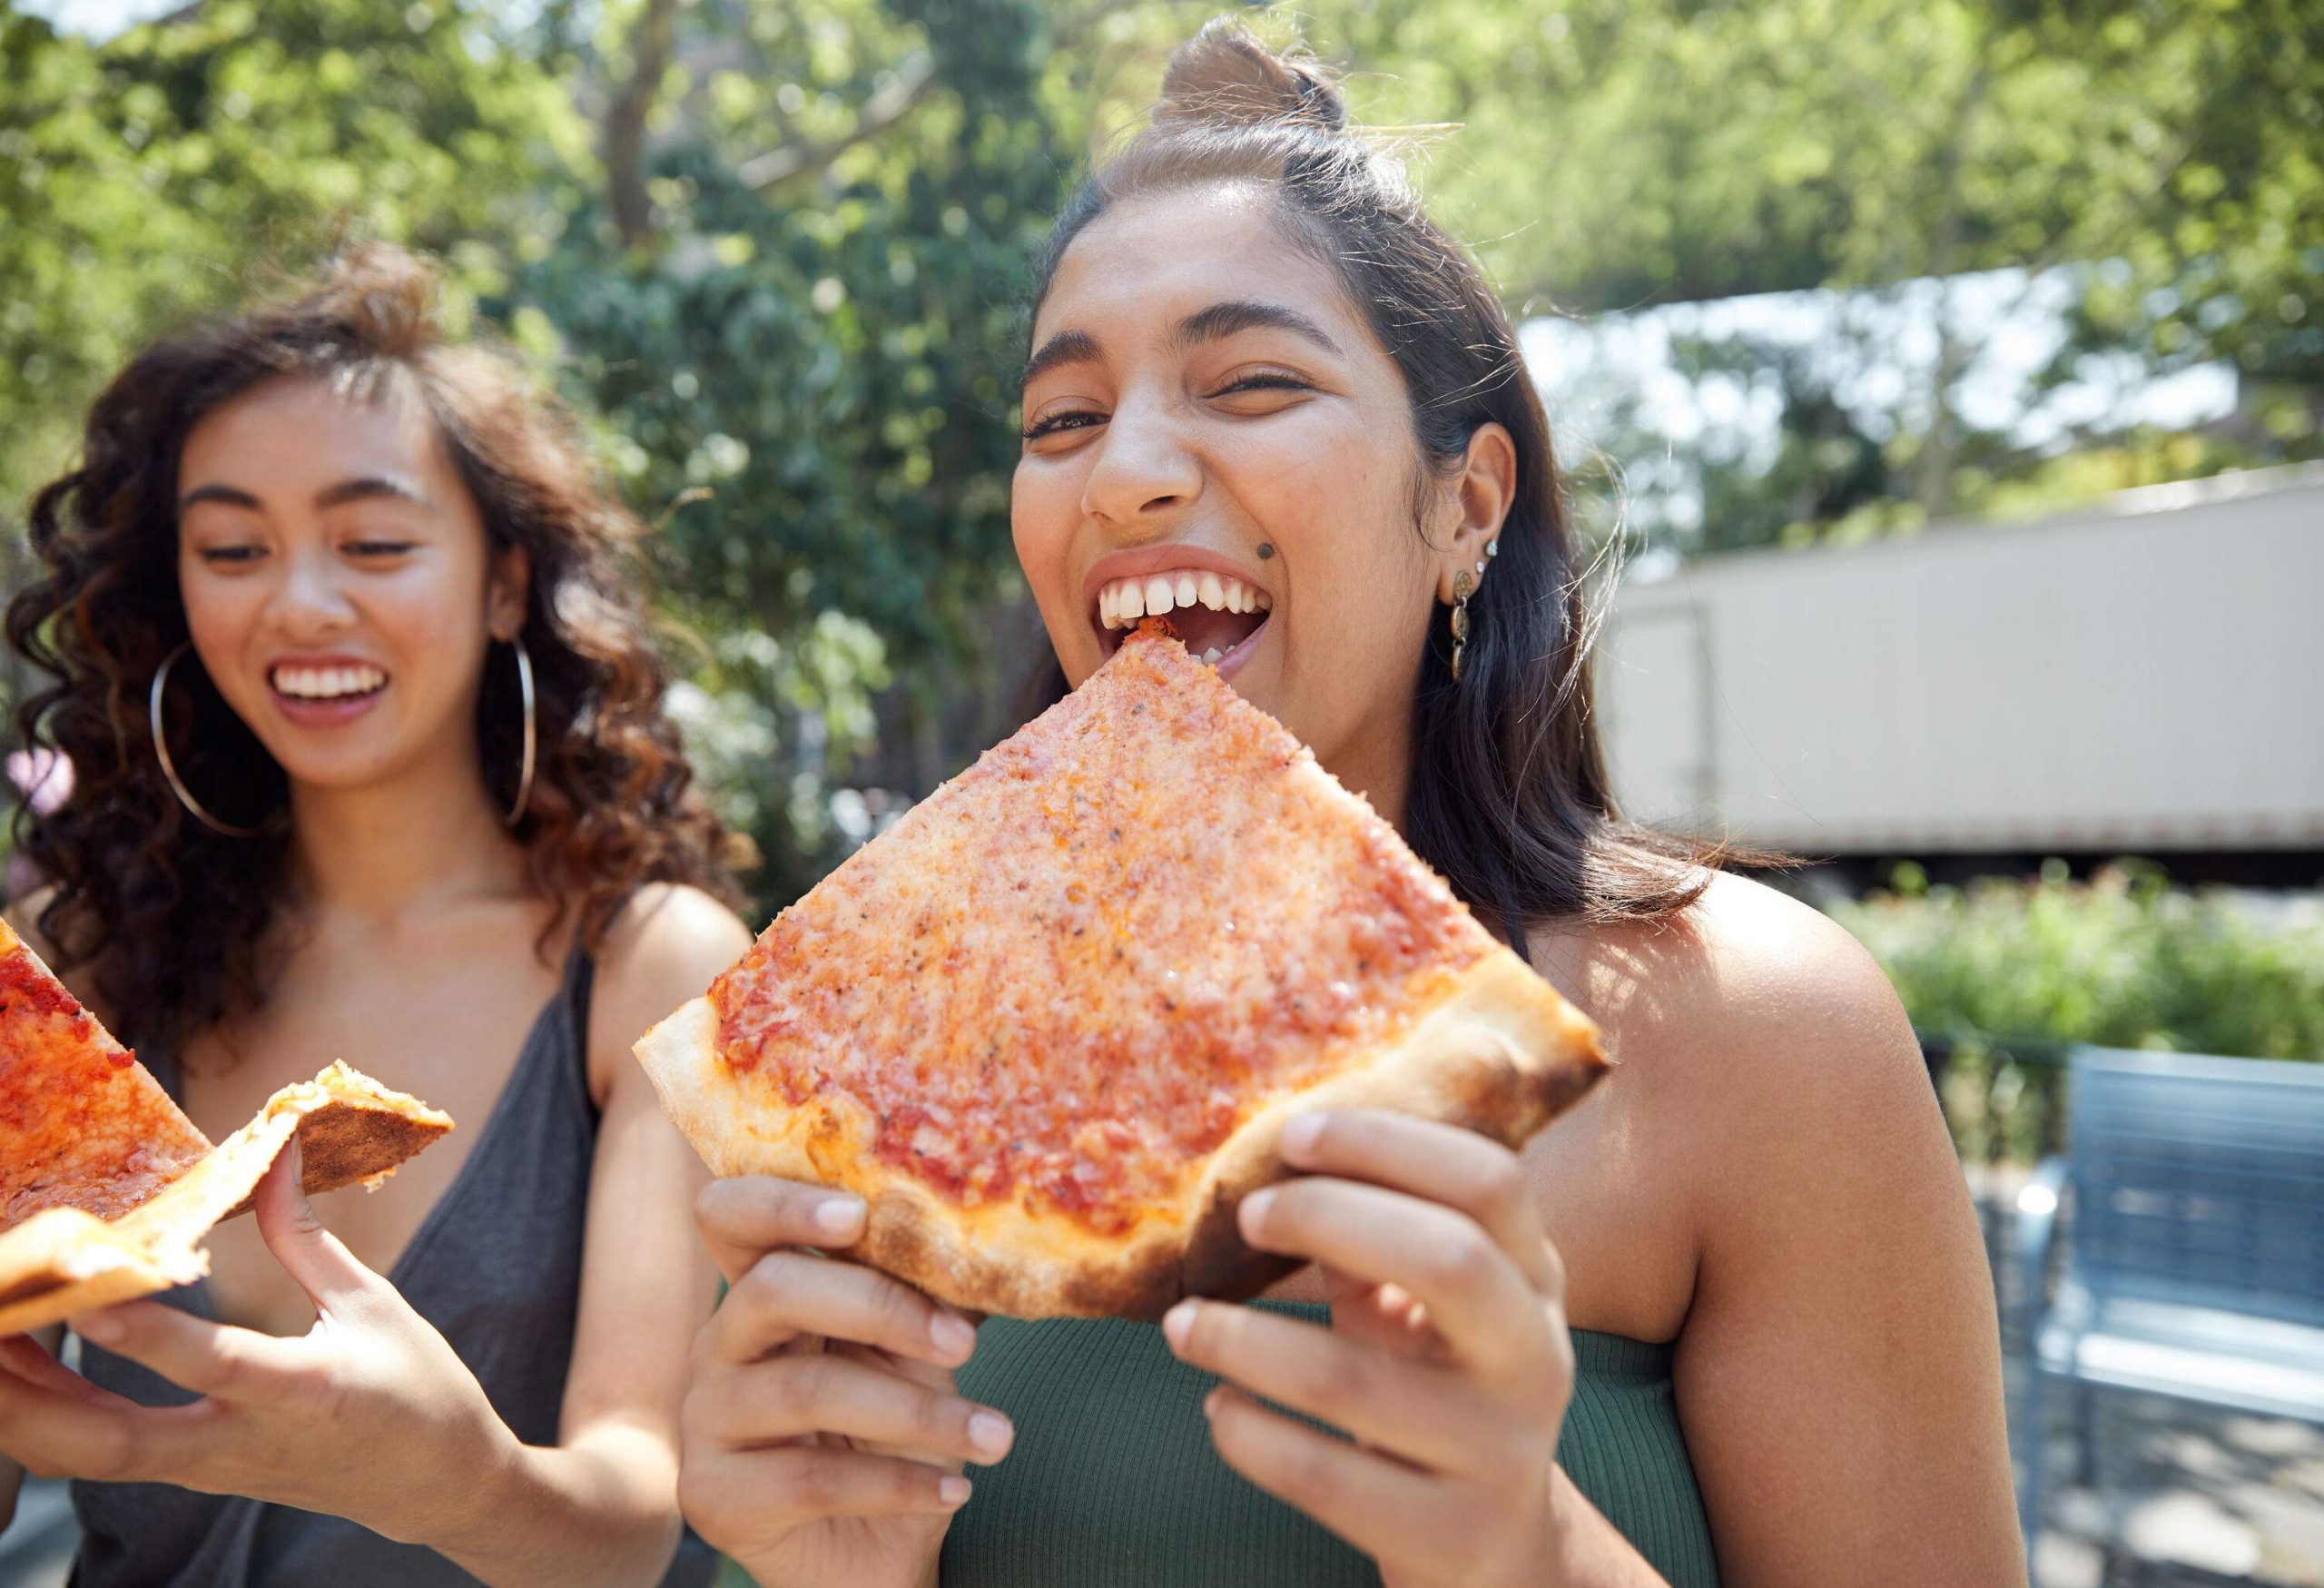 Two young women eating New York–style pizza at a park.